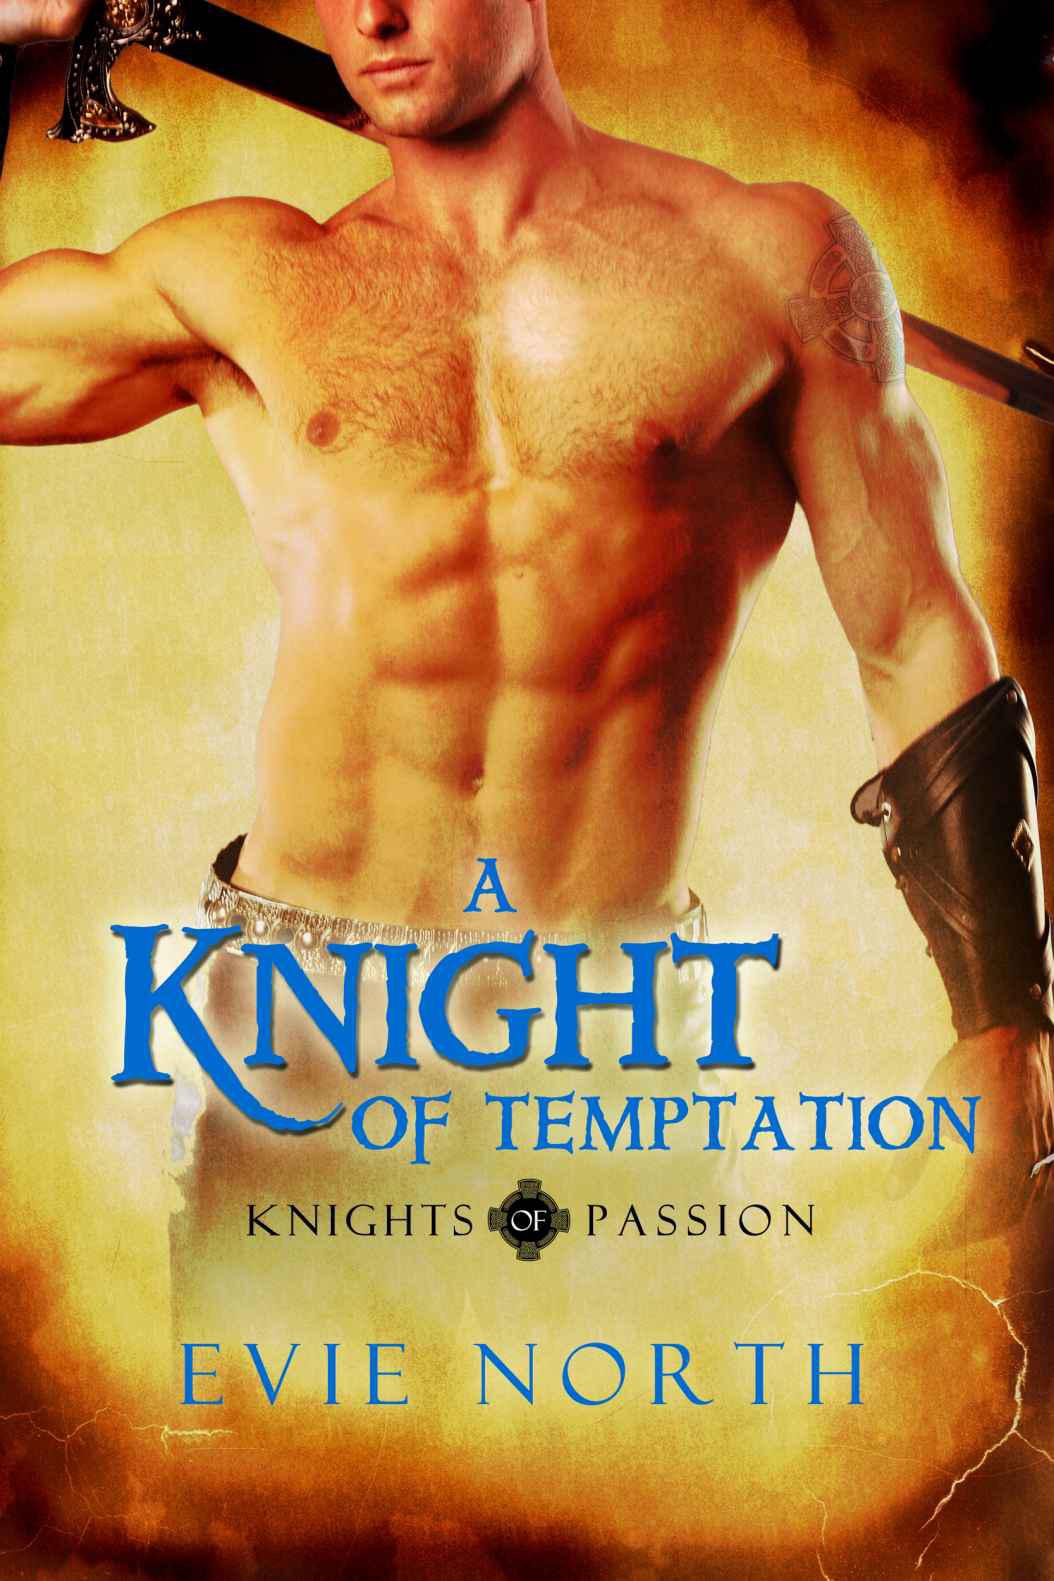 Knightly passions 0.81